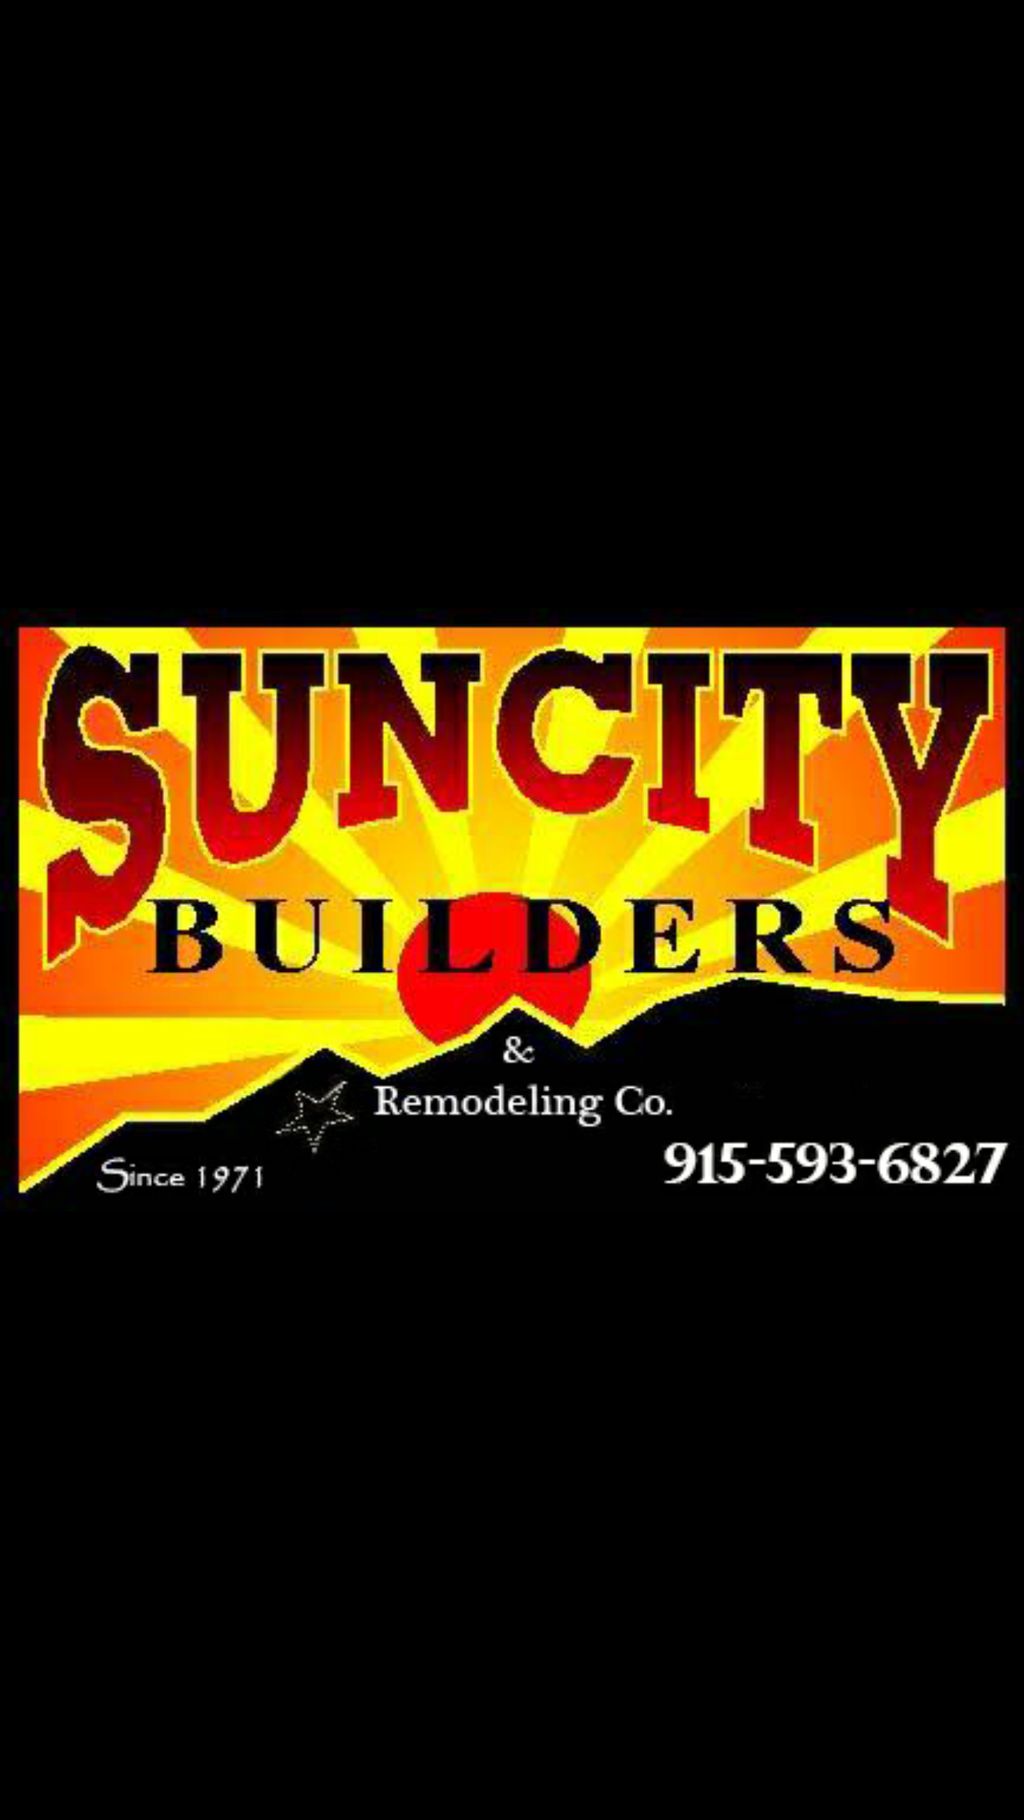 Sun City Builders and Remodeling Company